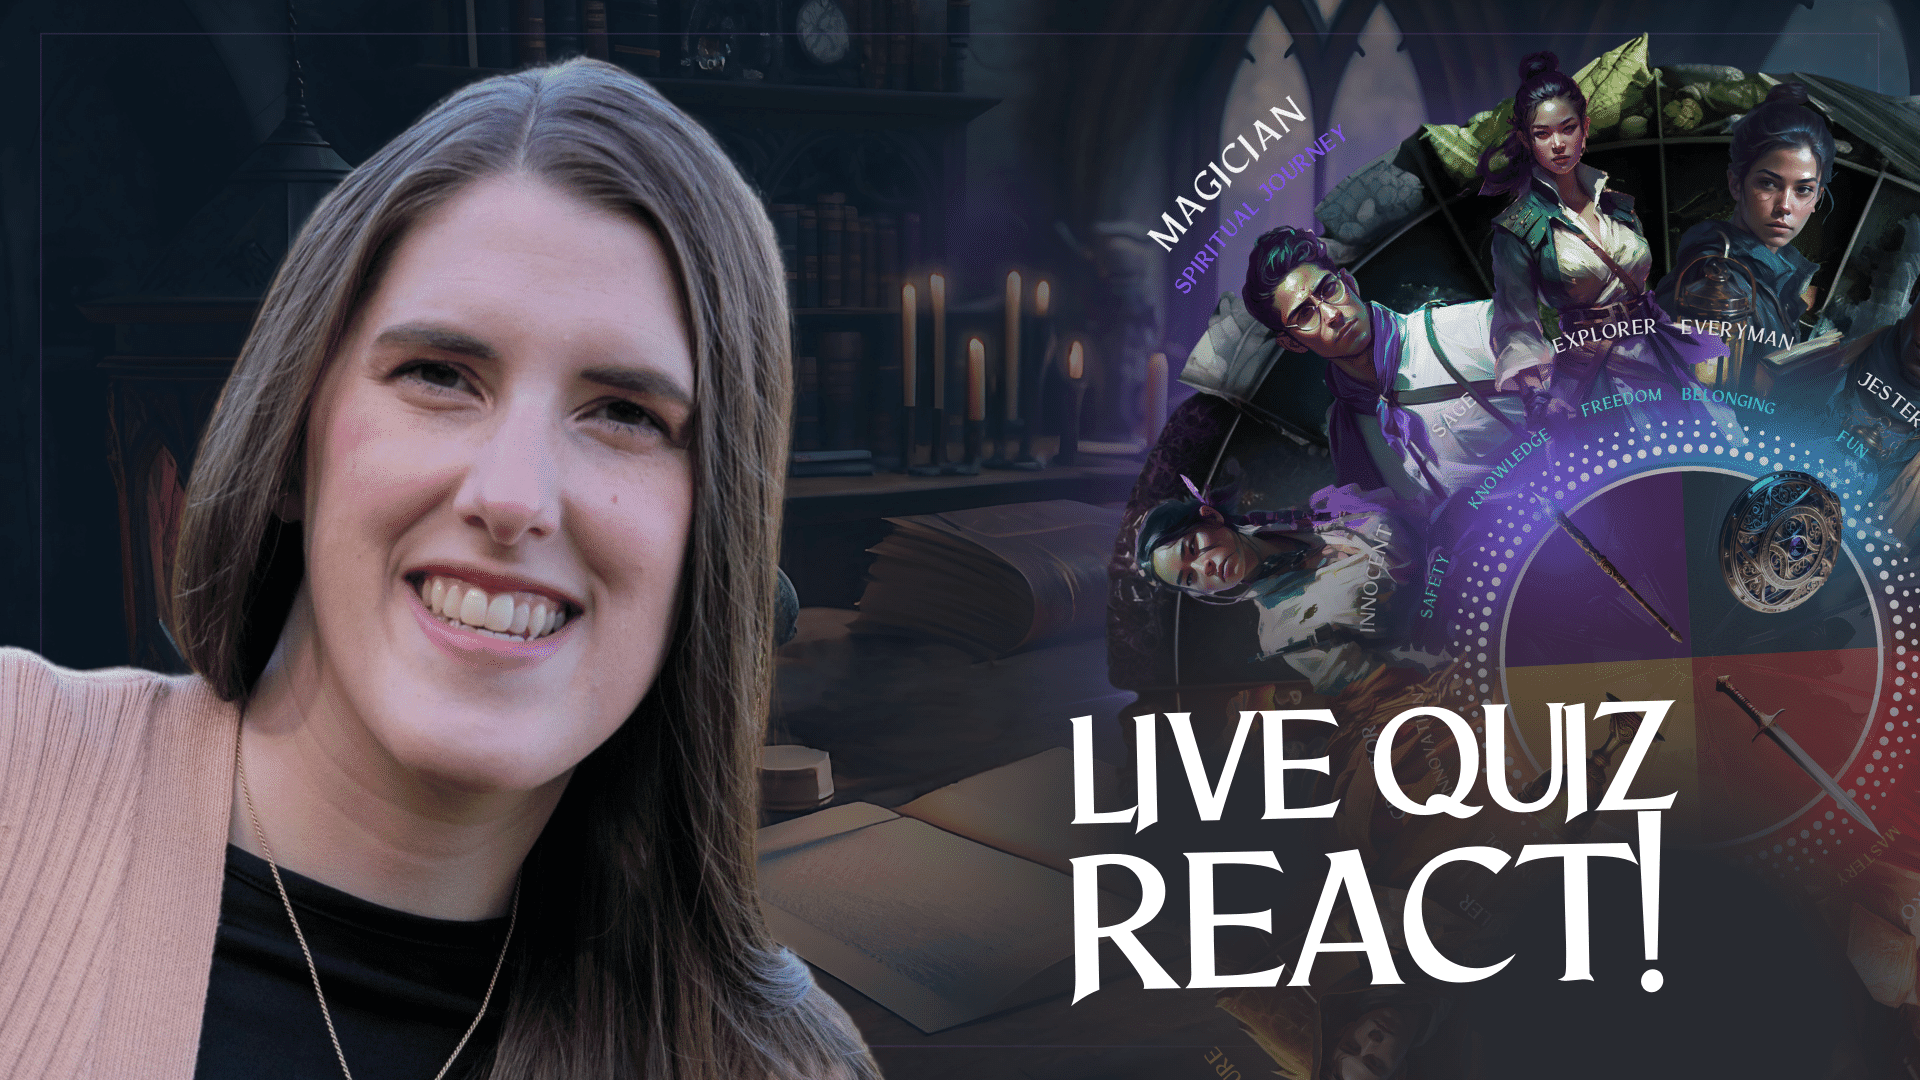 Live Quiz React! Anjanette Barr takes the Wheel of Legends Quiz